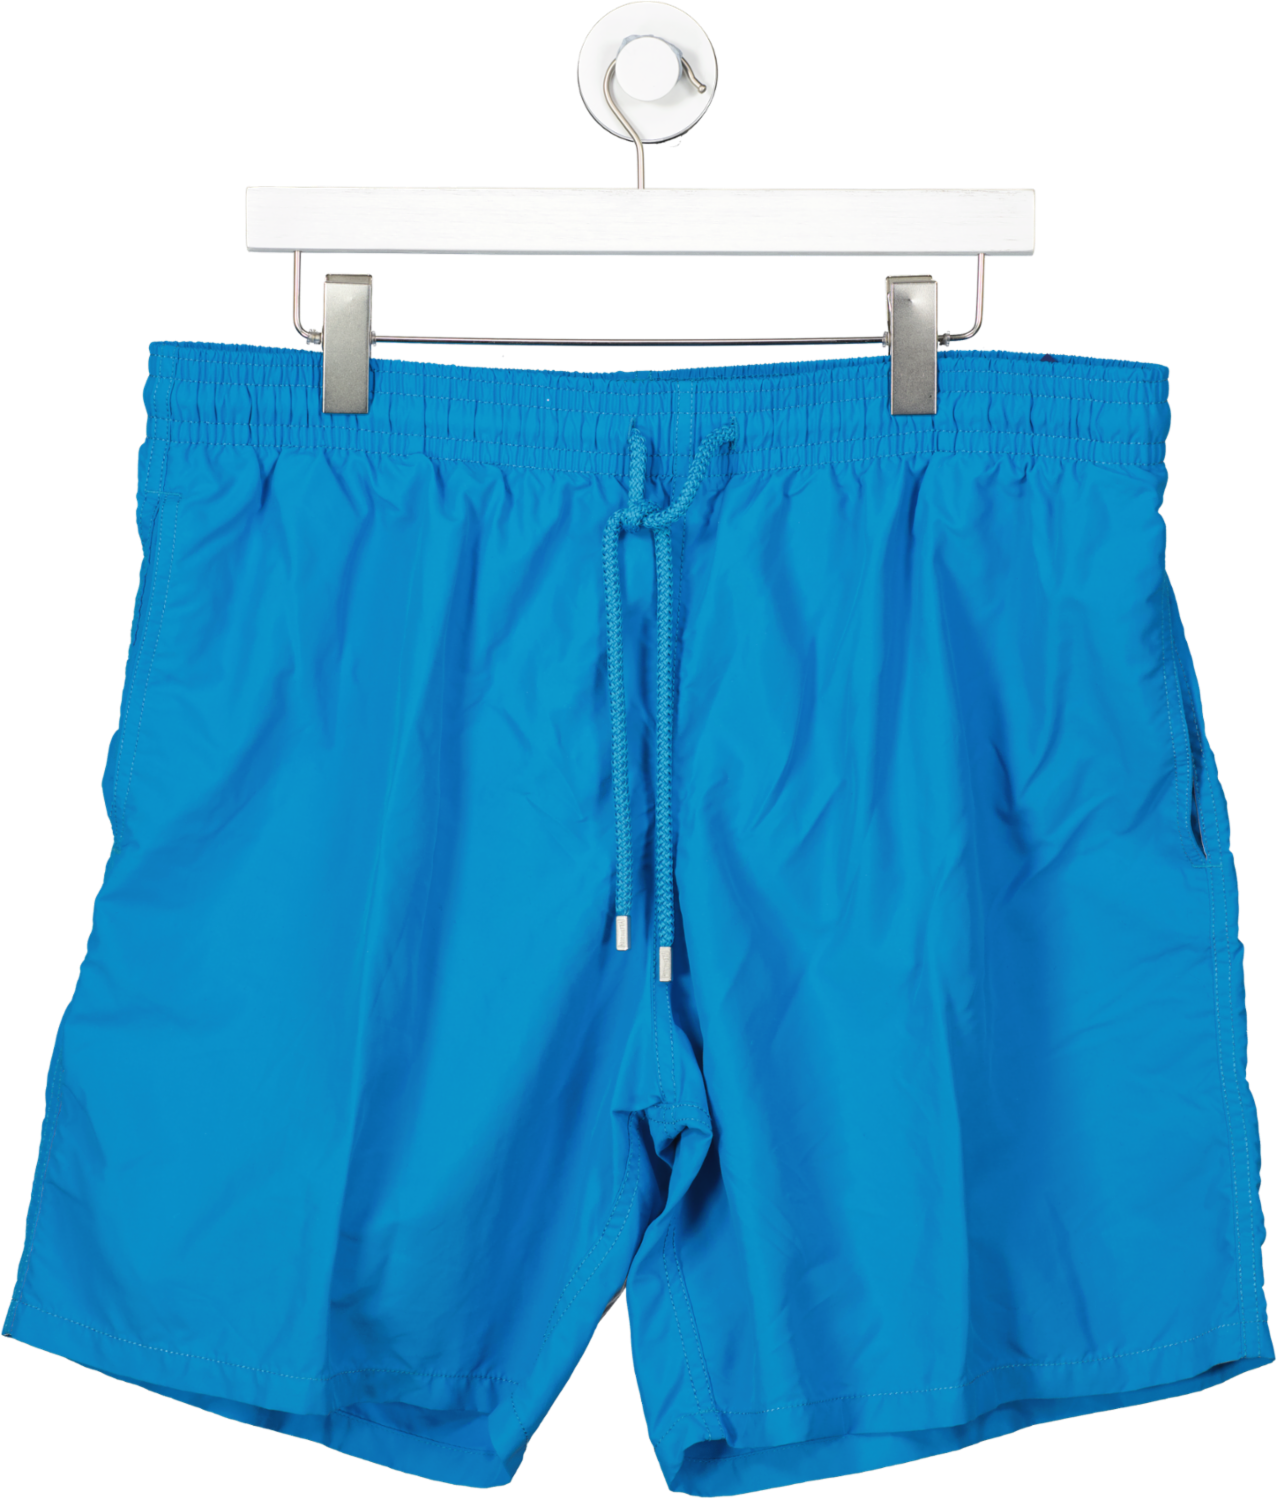 vilebrequin Solid Turquoise Blue Swim Shorts With Dustbag UK XXXL